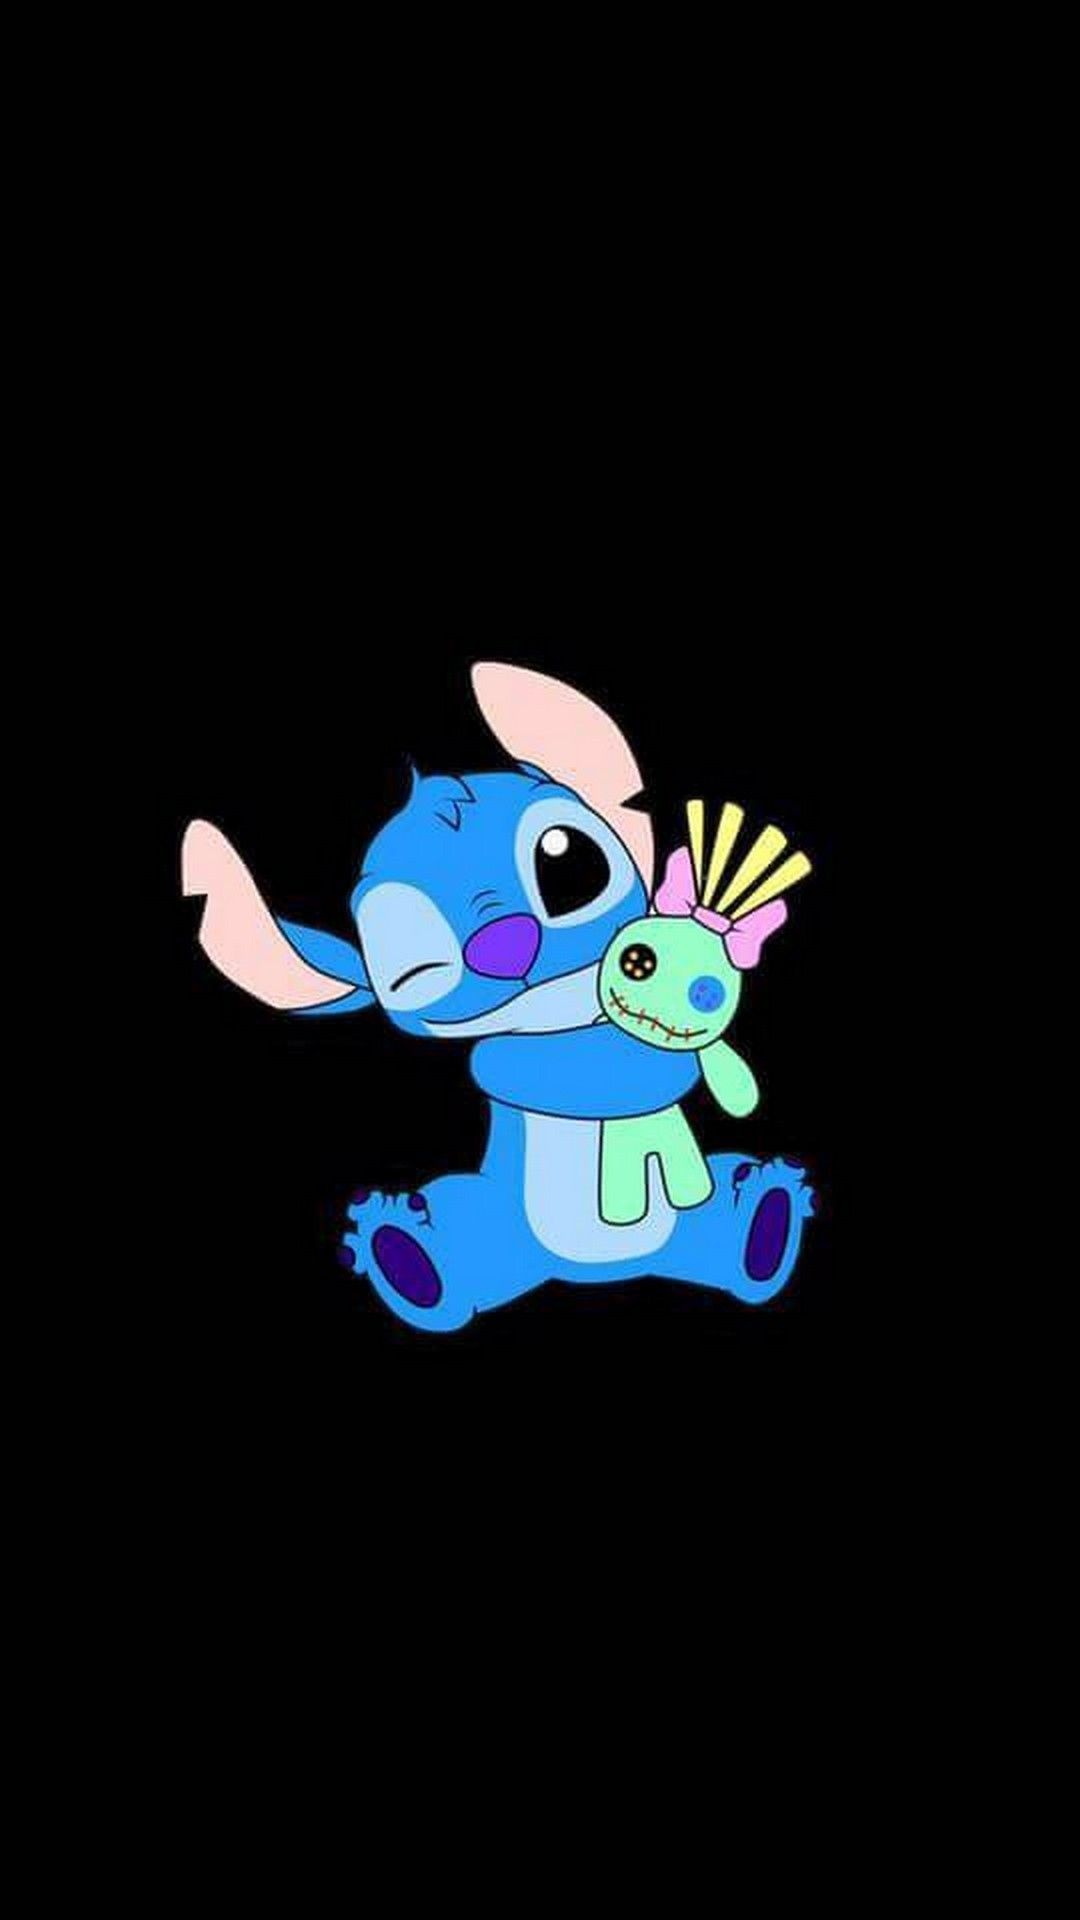 HD wallpaper, Phone Full Hd Lilo And Stitch The Series Background, Angel Phone Accessories, Disney Iphone Wallpapers, 1080X1920 Full Hd Phone